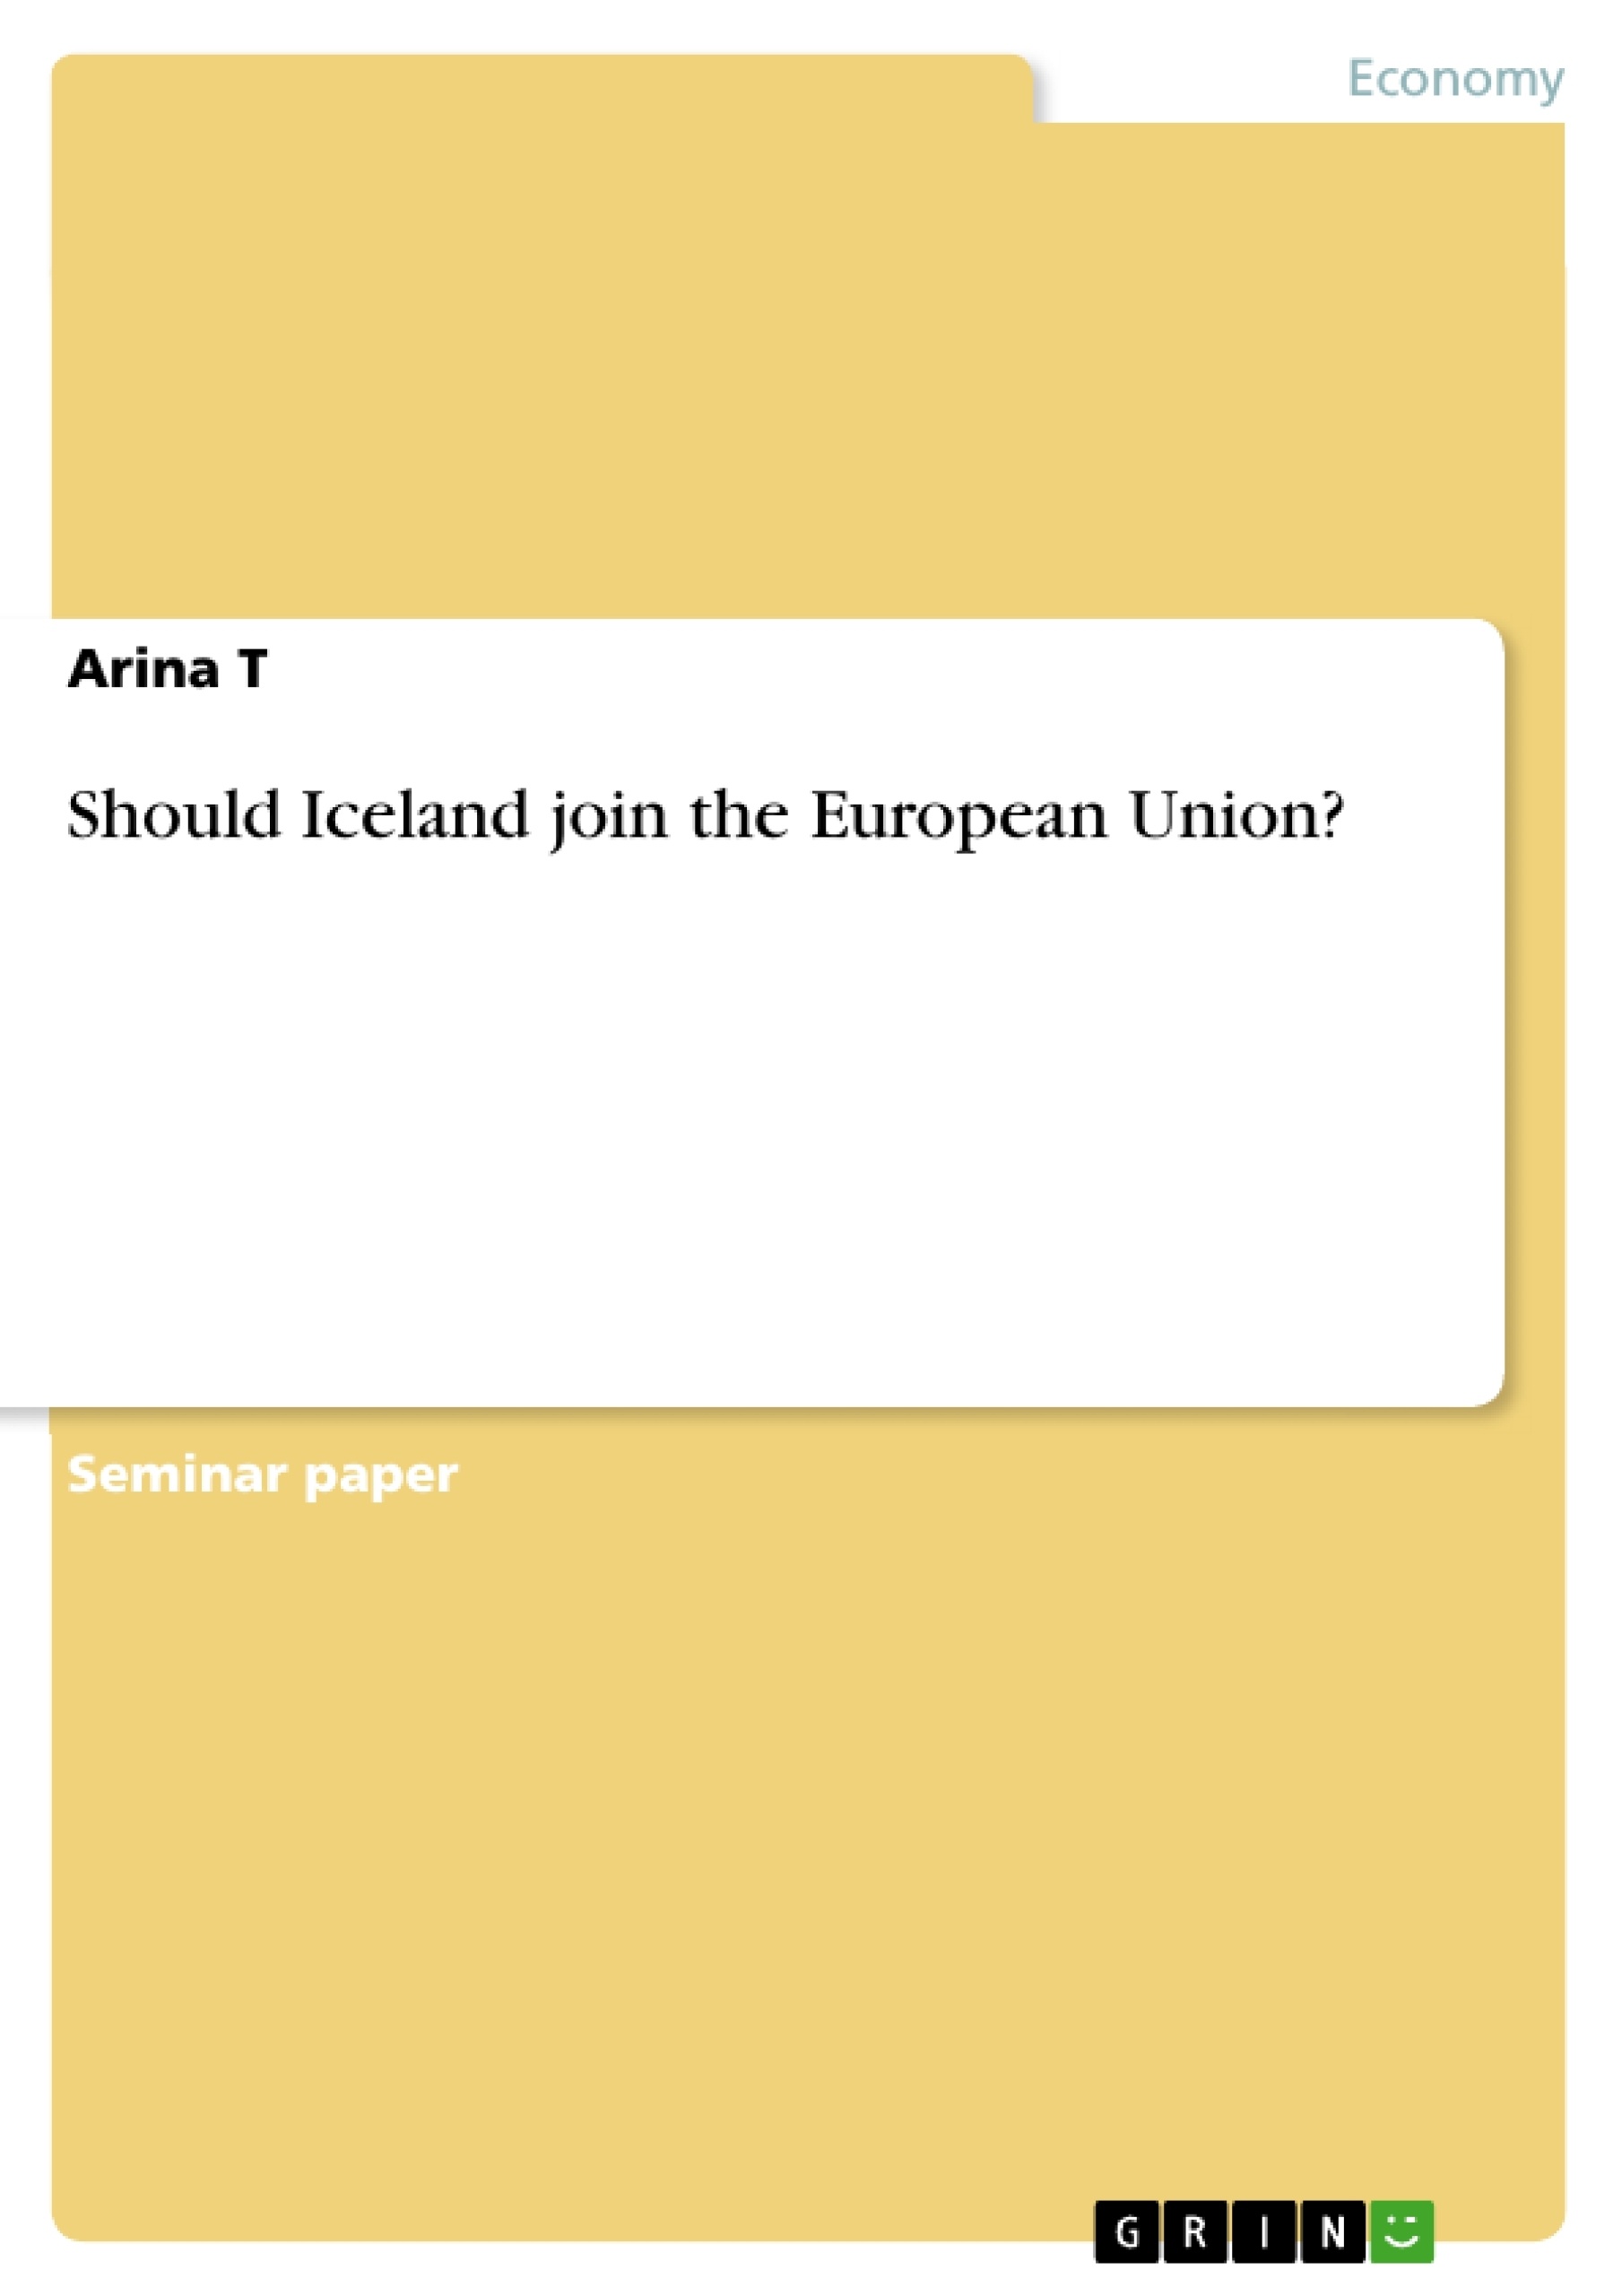 Titre: Should Iceland join the European Union?